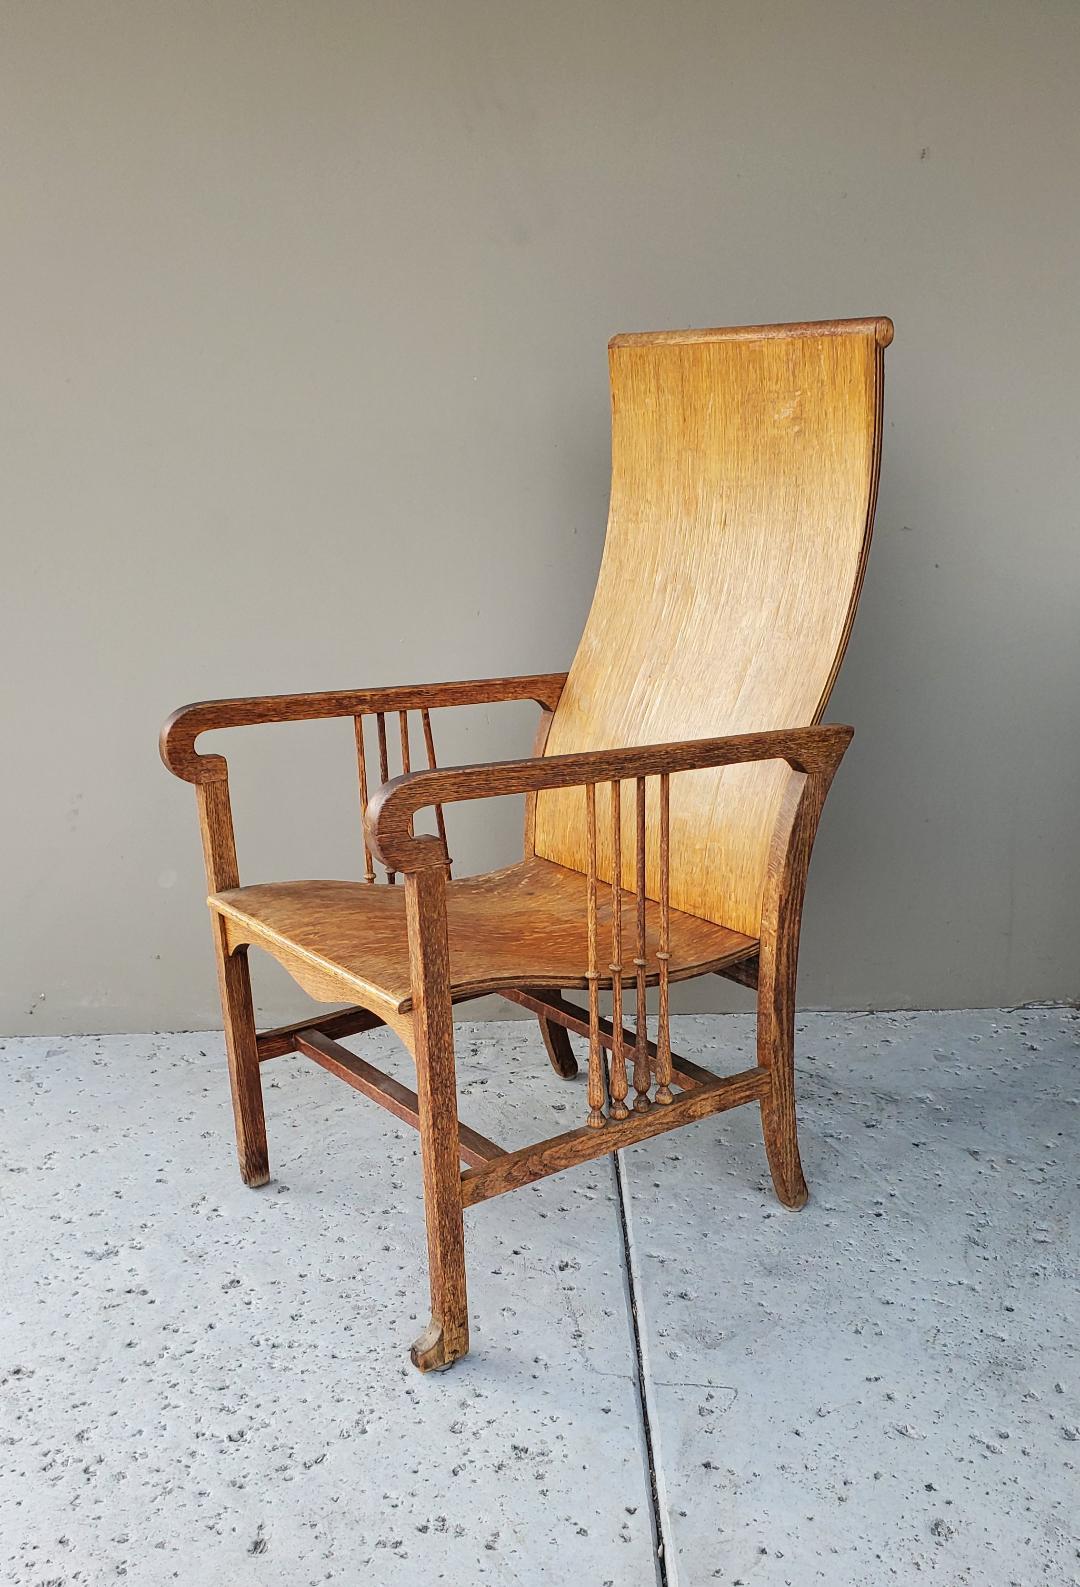 Antique Quarter Sawn Mission Oak Craftsman Lounge Chair With Spindle Accents On The Sides Of Armrests.
Beautiful Quarter Sawn Oak Single Tall Back Lounge Chair Strong And Sturdy.  Great Carved Designed Armrests With Turned Teardrop Spindles.
The